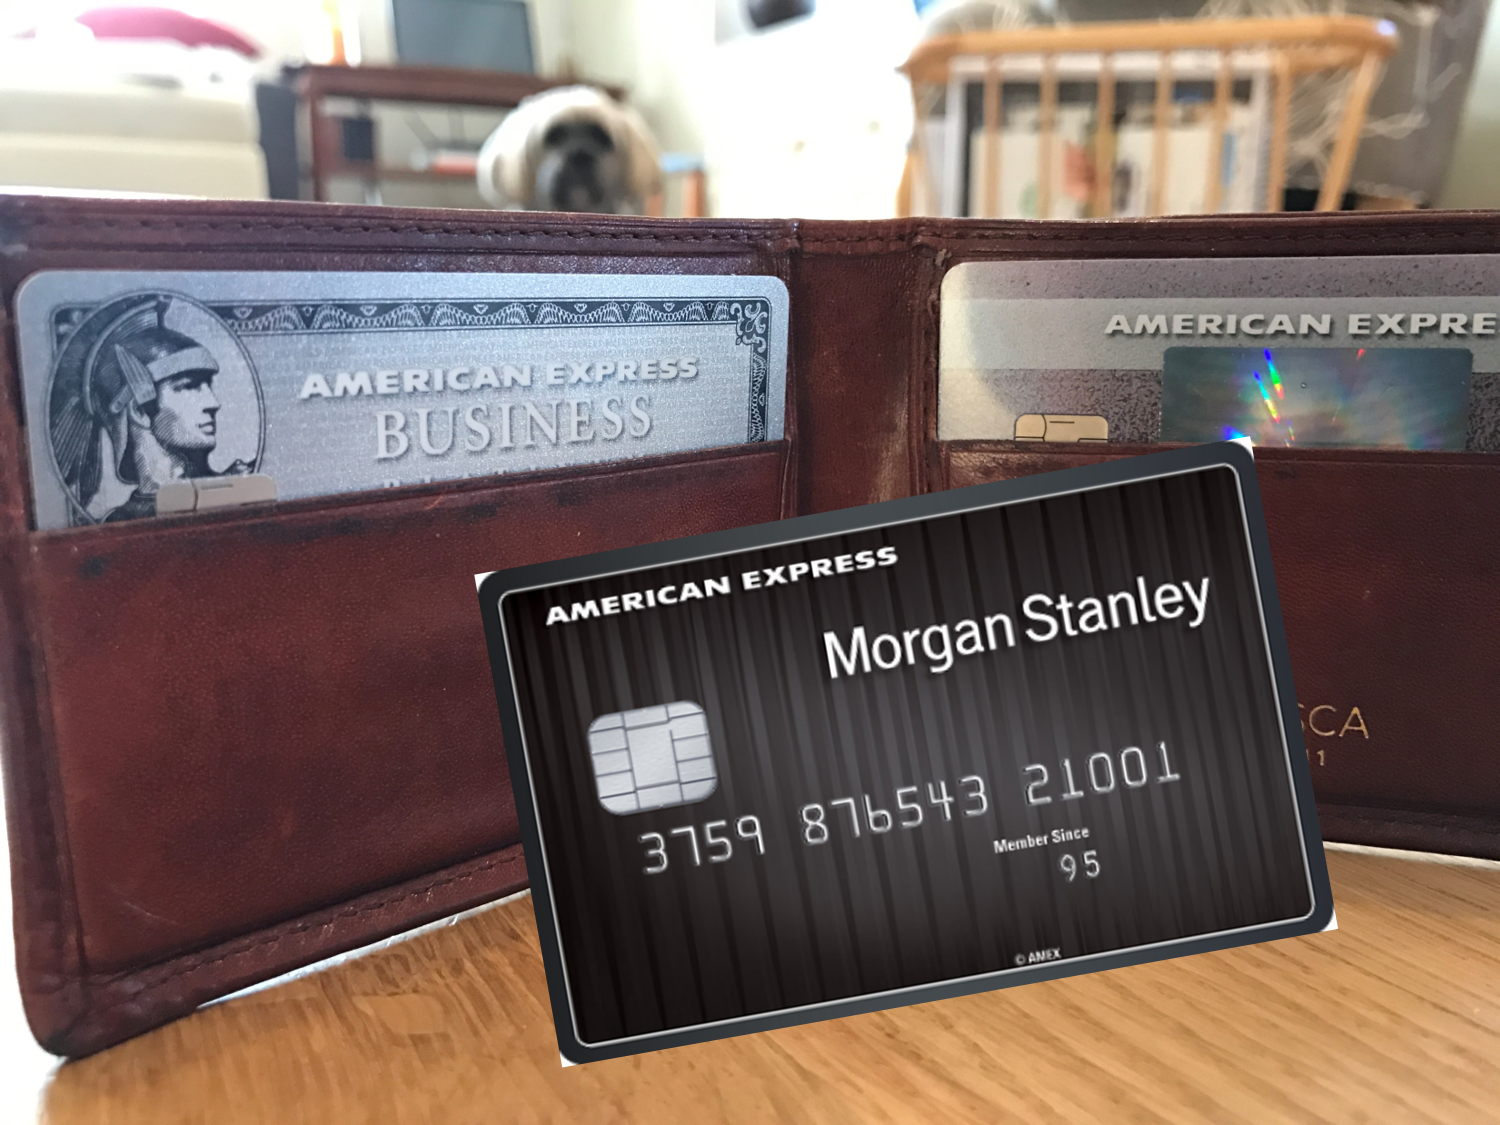 Morgan Stanley - Your Financial Freedom with Our Credit Cards